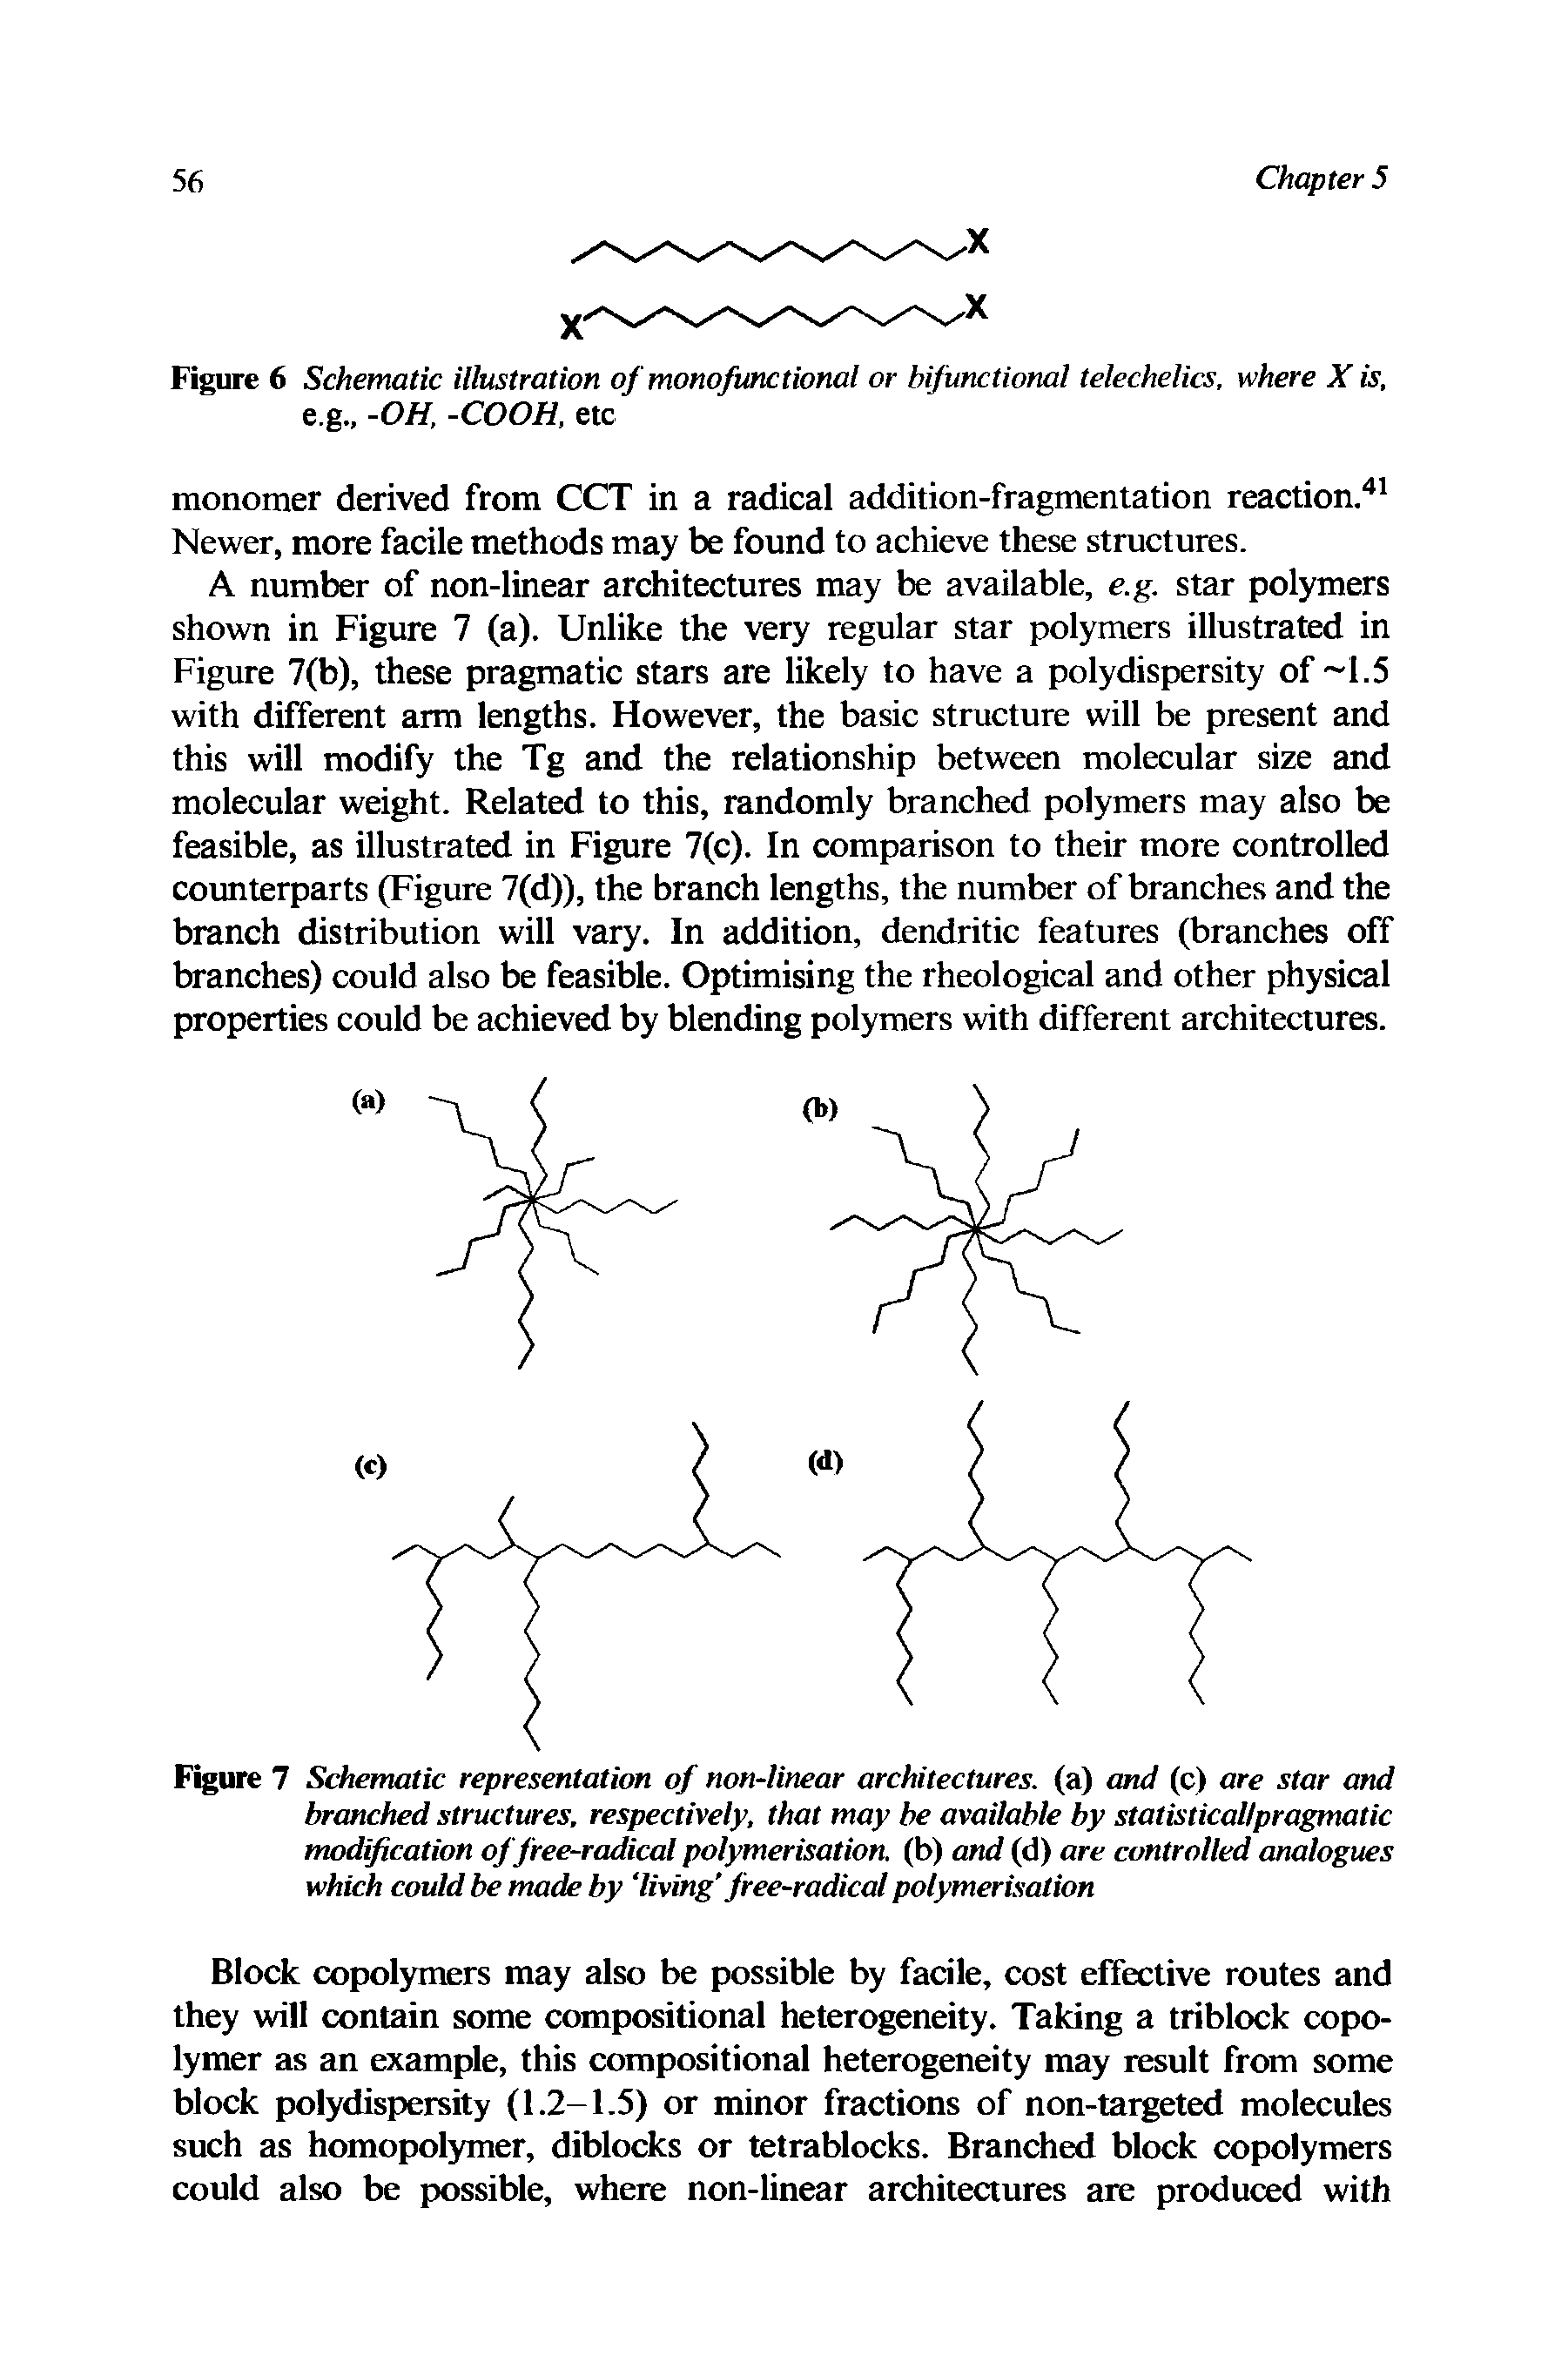 Figure 7 Schematic representation of non-linear architectures, (a) and (c) are star and branched structures, respectively, that may he available by statisticallpragmatic modification of free-radical polymerisation, (b) and (d) are controlled analogues which could be made by living free-radical polymerisation...